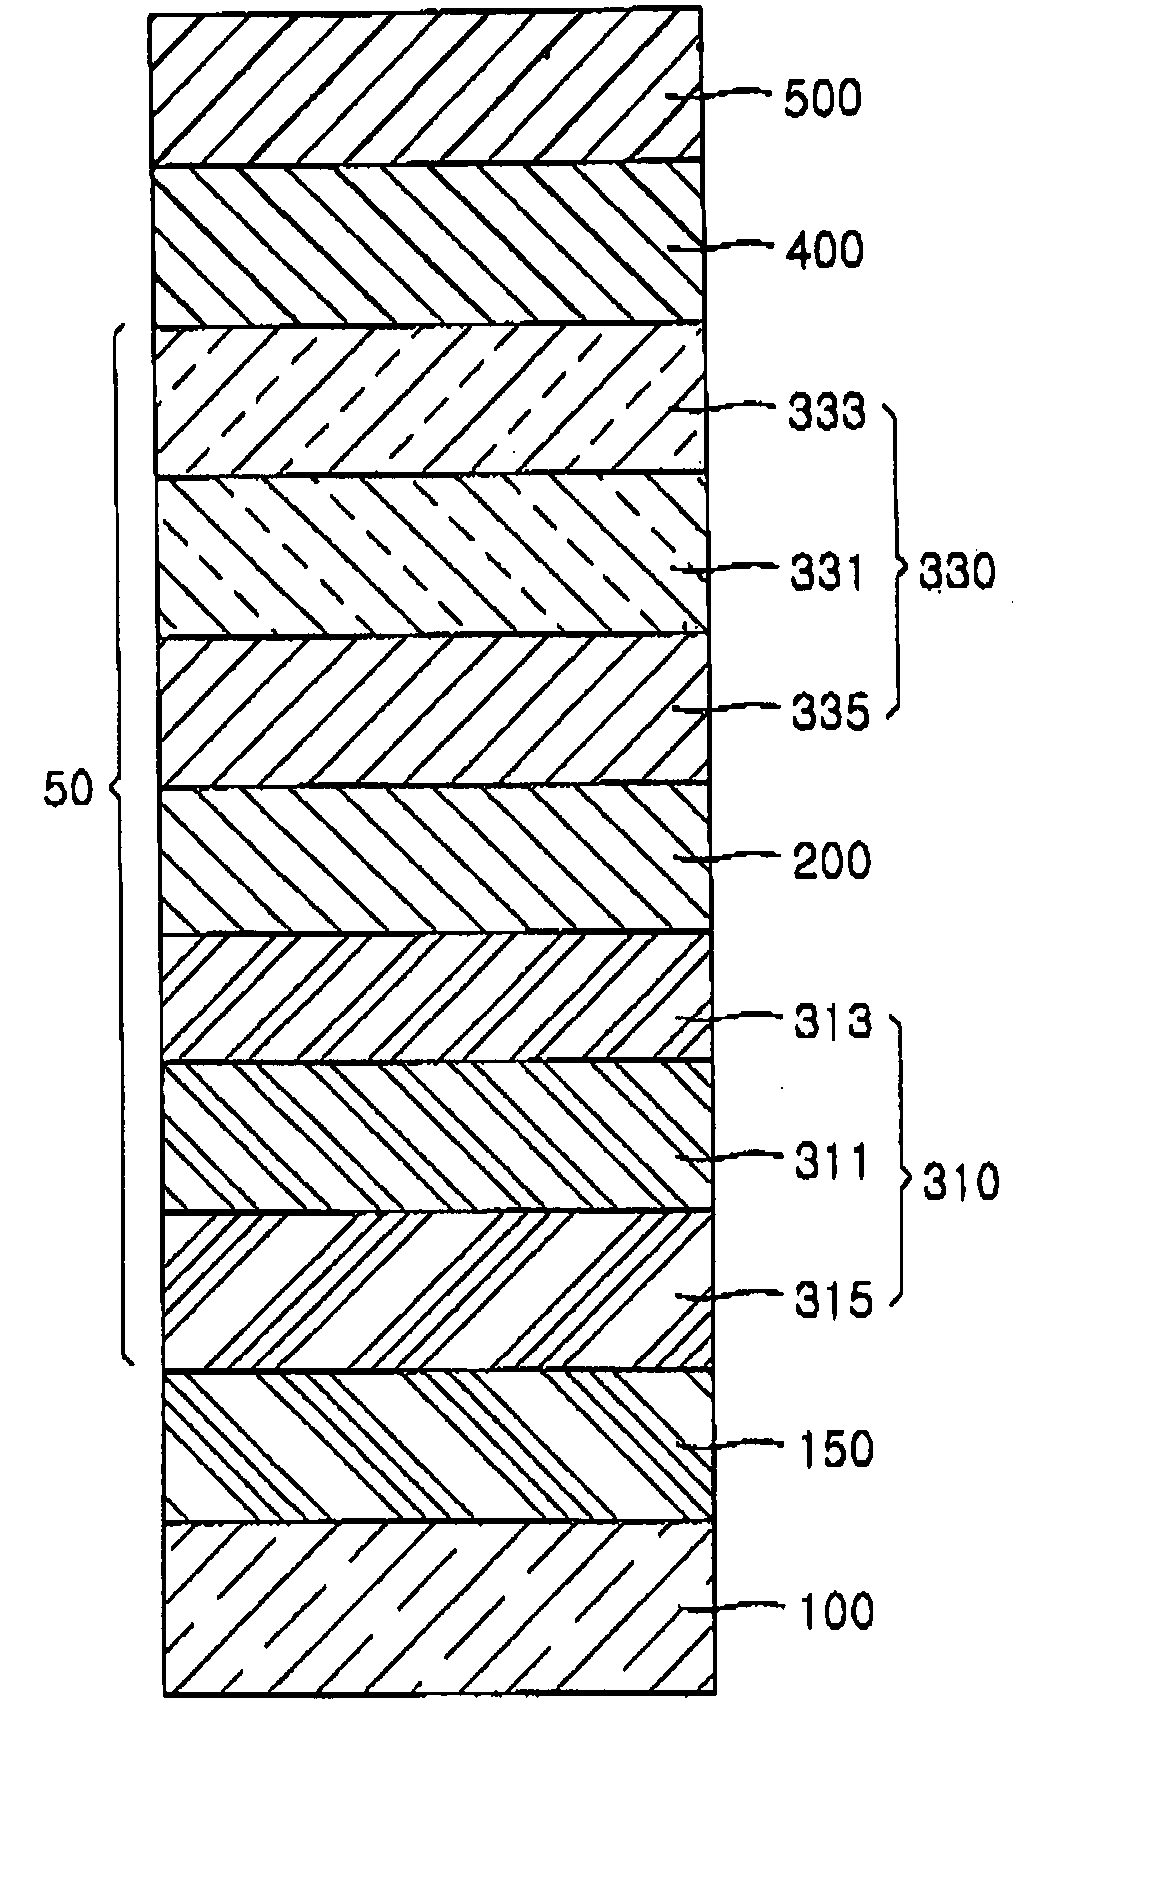 Perpendicular magnetic recording media with laminated soft magnetic underlayer